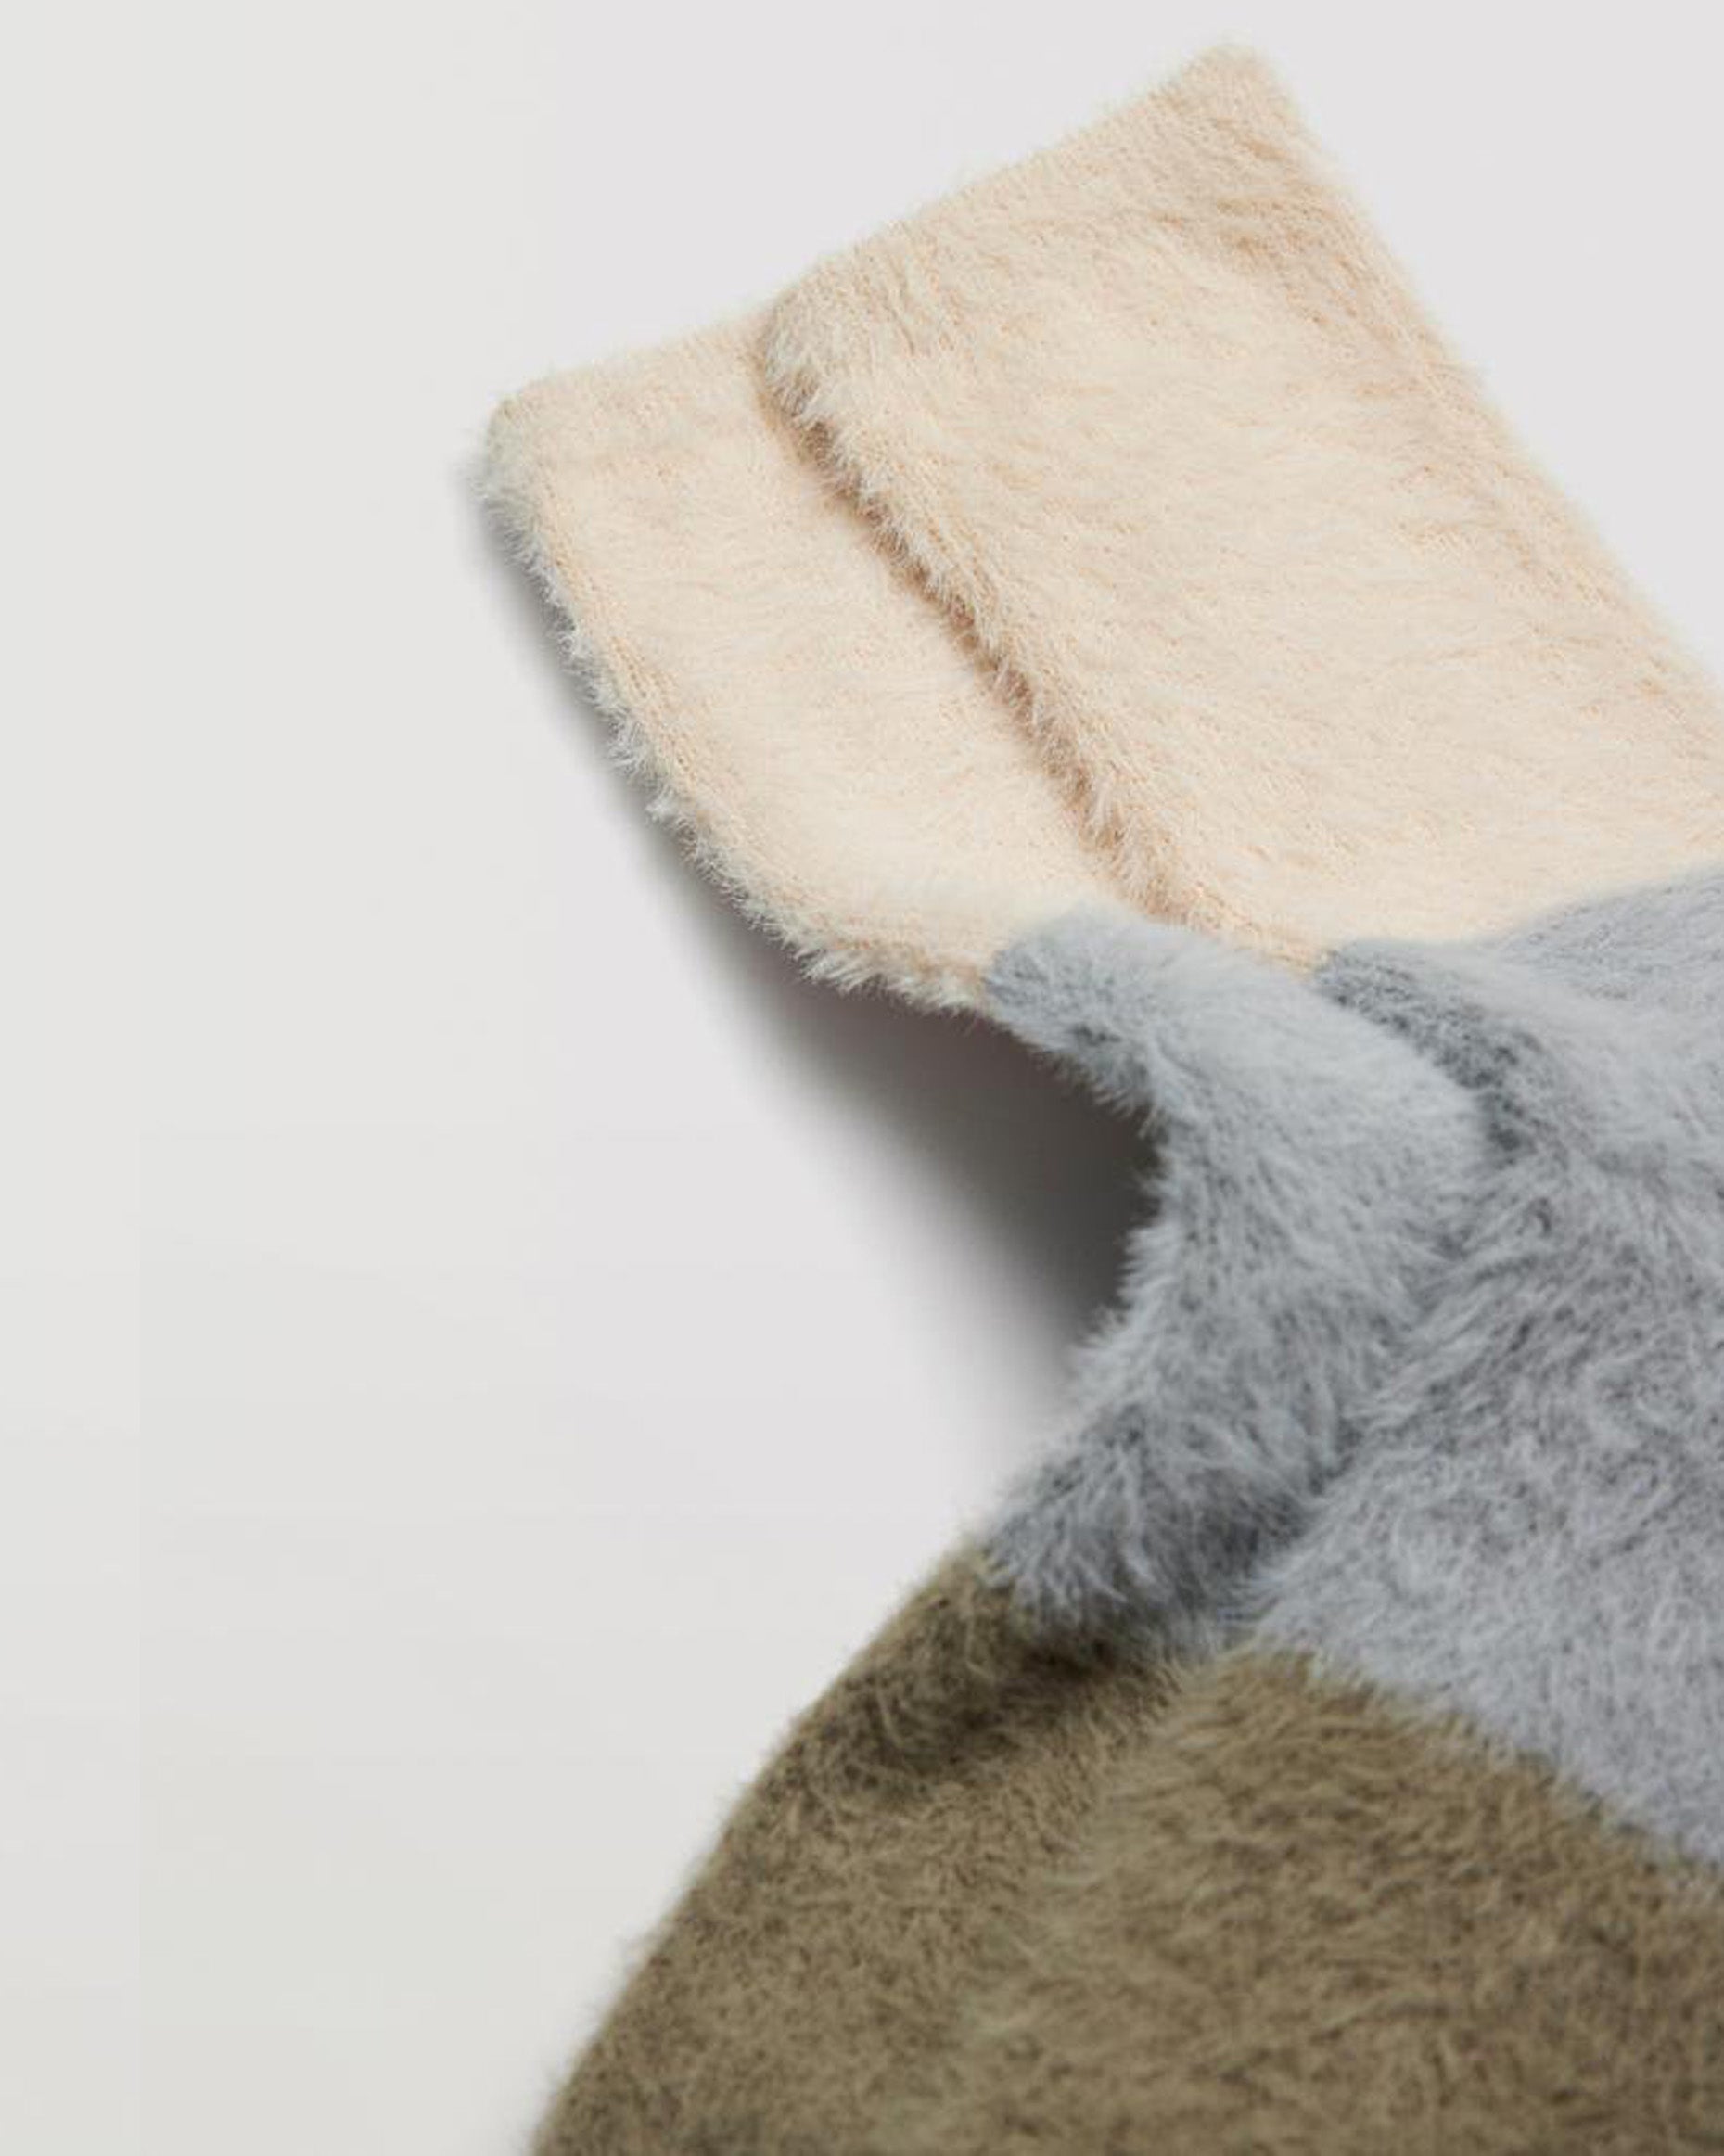 Ysabel Mora 12898 Fluffy Tricolour Socks - Soft and fluffy socks with 3 panels of colour, anti-pressure cuff in beige/grey/khaki green